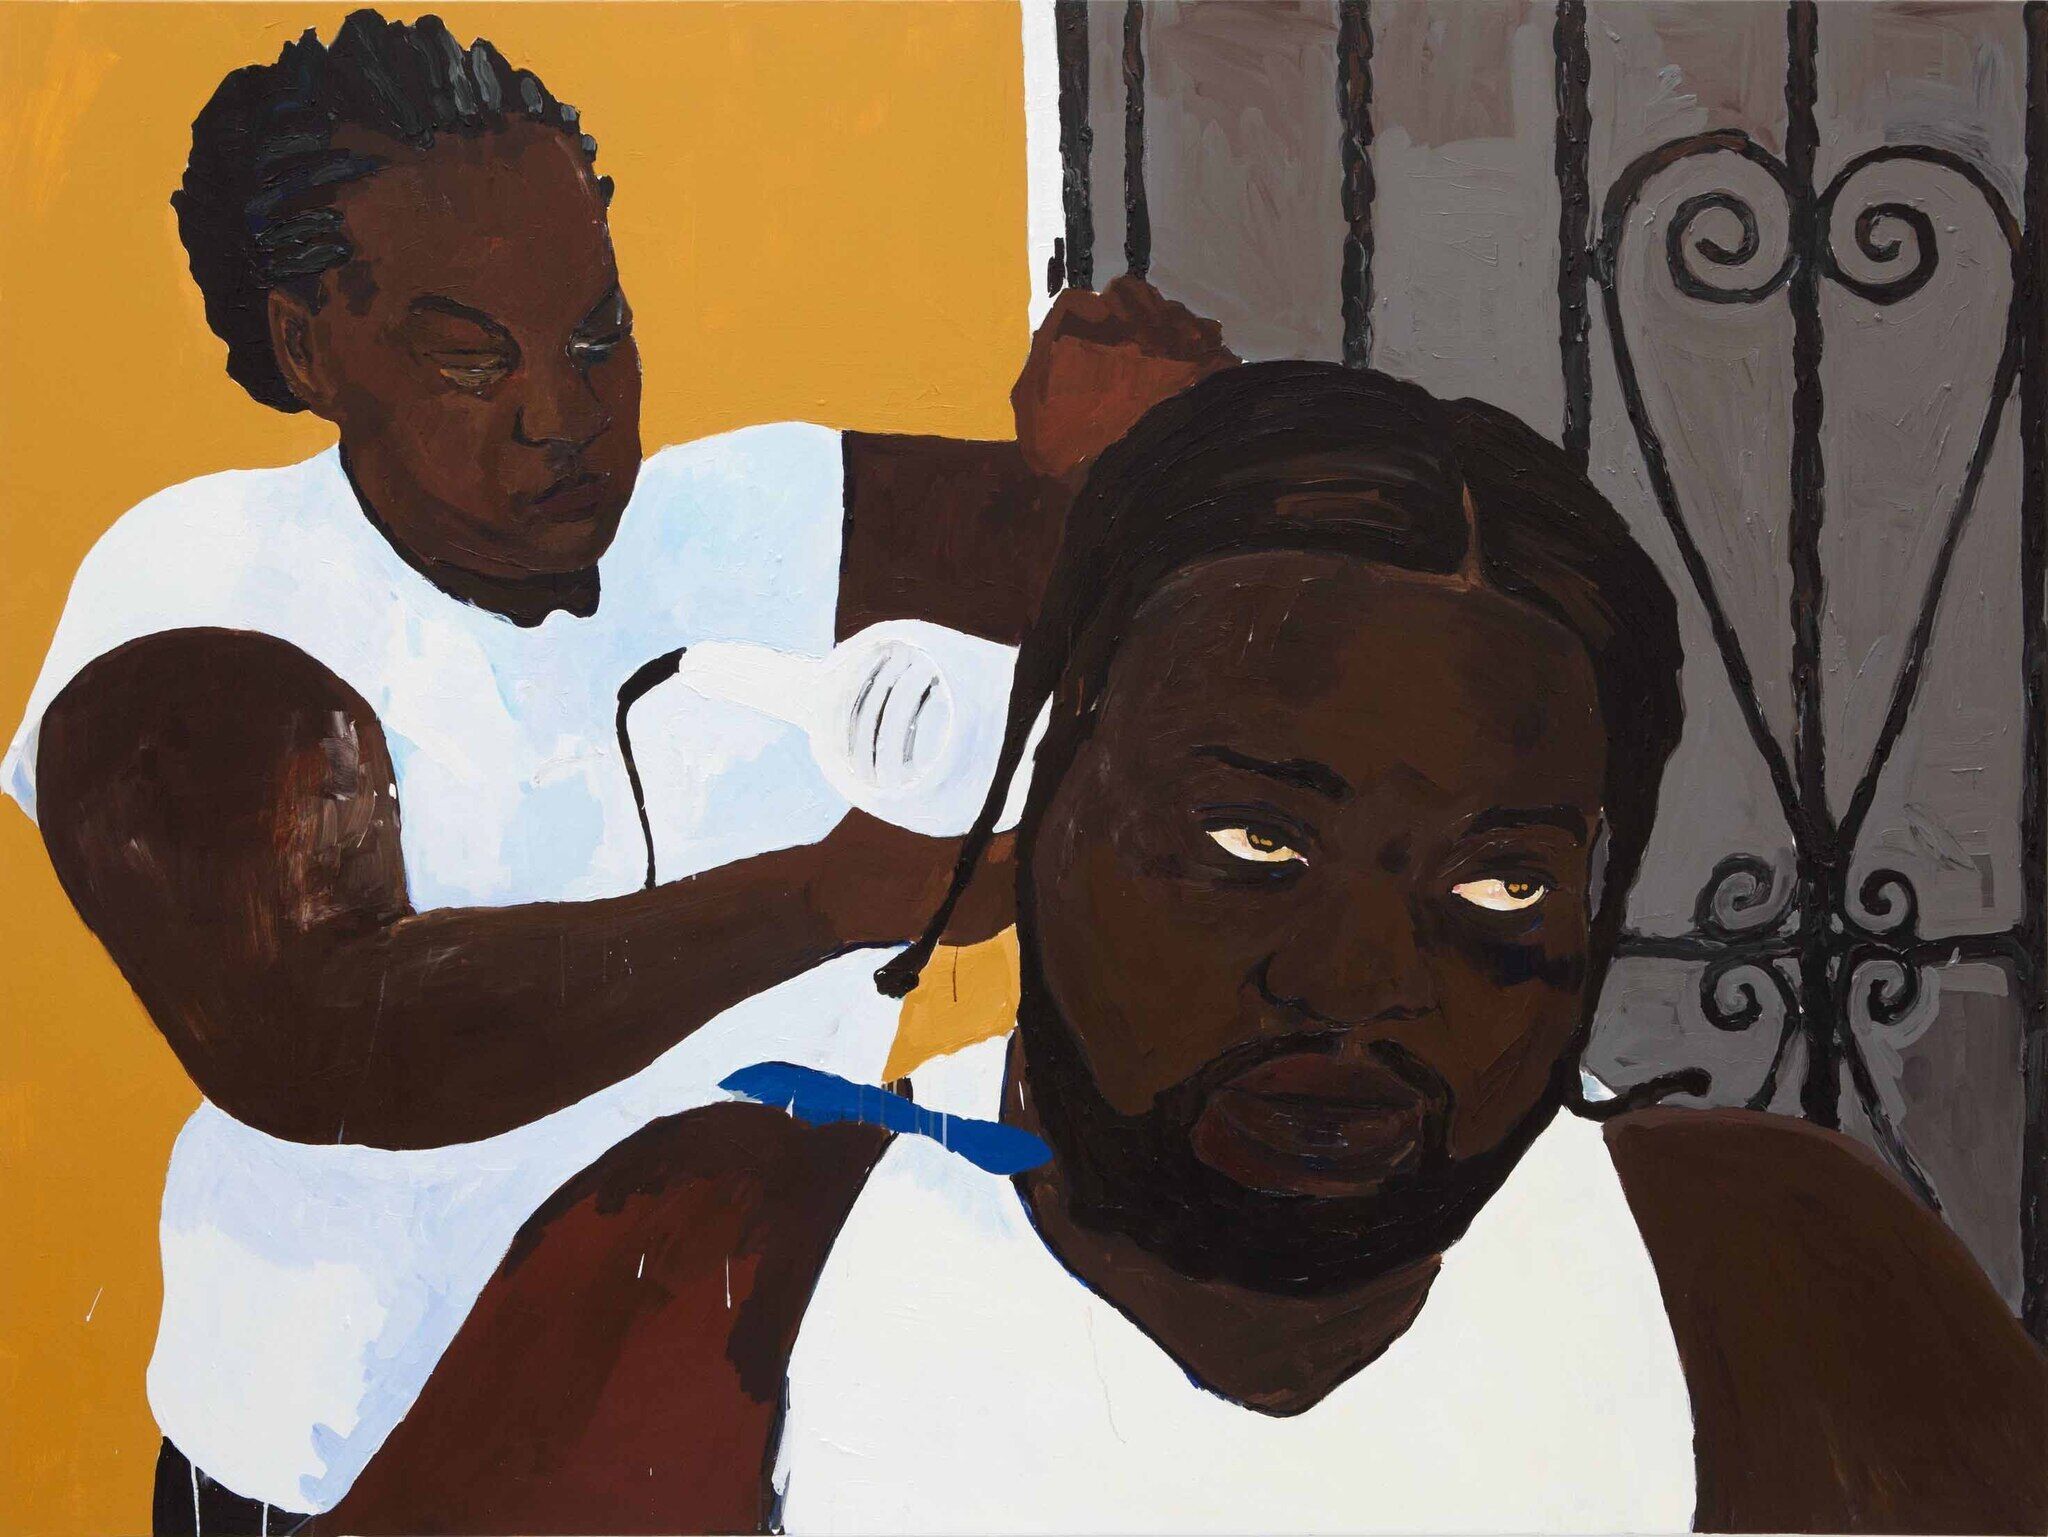 A bearded dark skinned man sits in the foreground while an older woman stands behind him, to the left of the painting. She holds a white hairdryer to his hair. The left half of the background is mustard yellow. On the right half is a black, gate-like metal door with decorative twists and swirls.